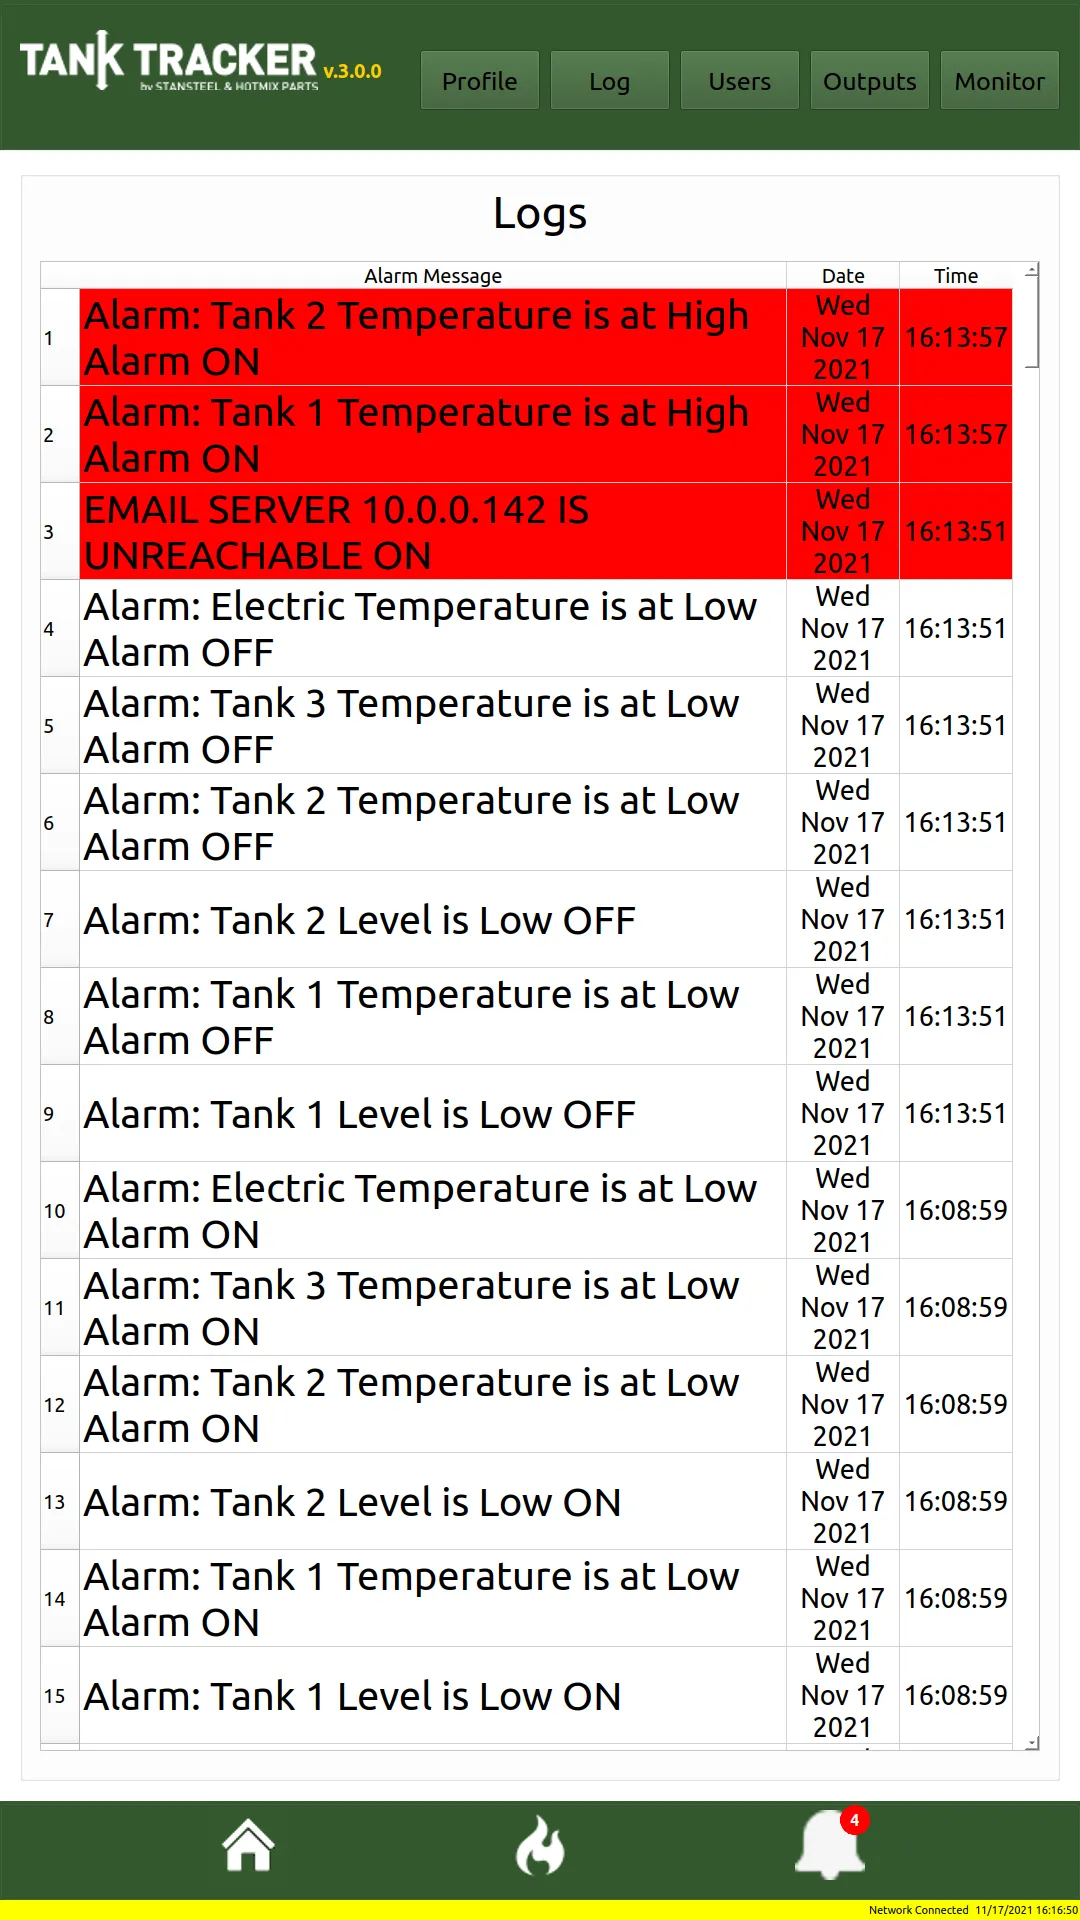 Error notification and logging in the Tank Tracker app